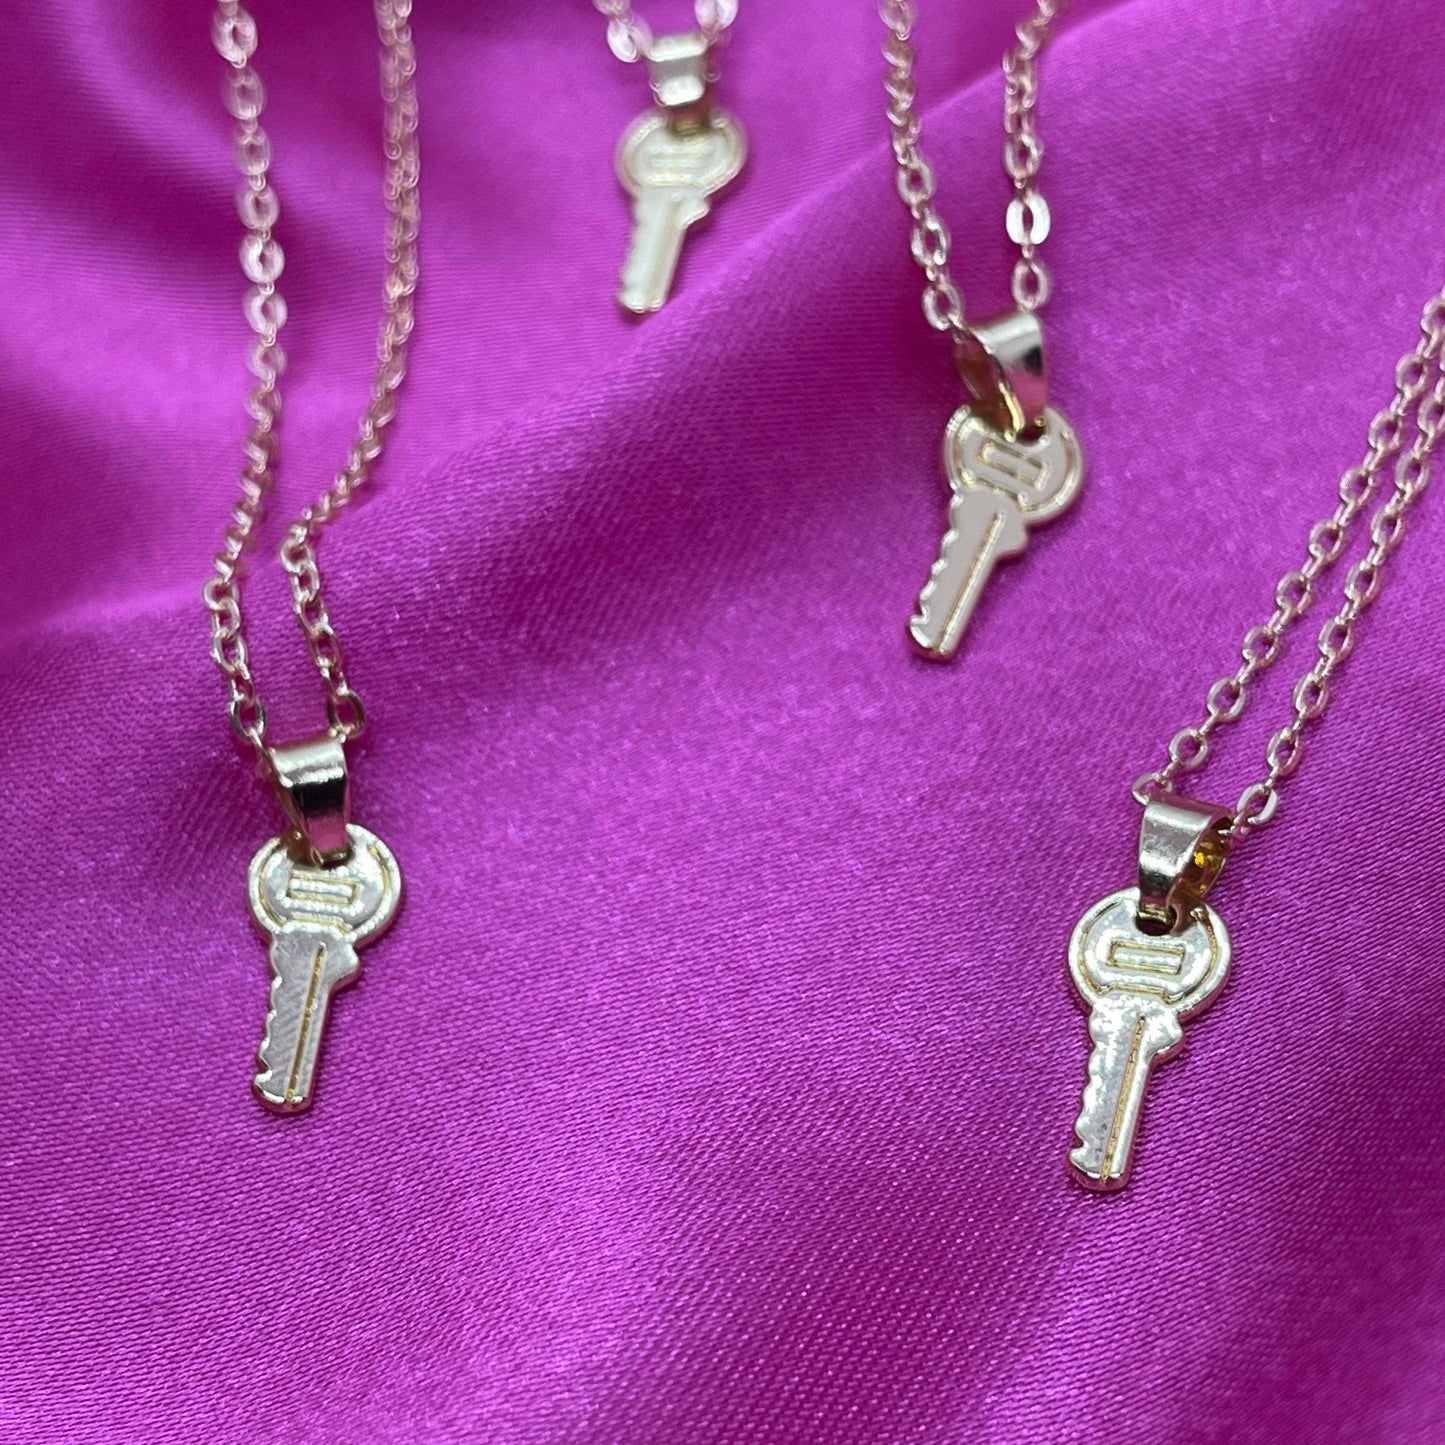 Key Charm Necklace | Quirky Chain - Lxyclr Authentic